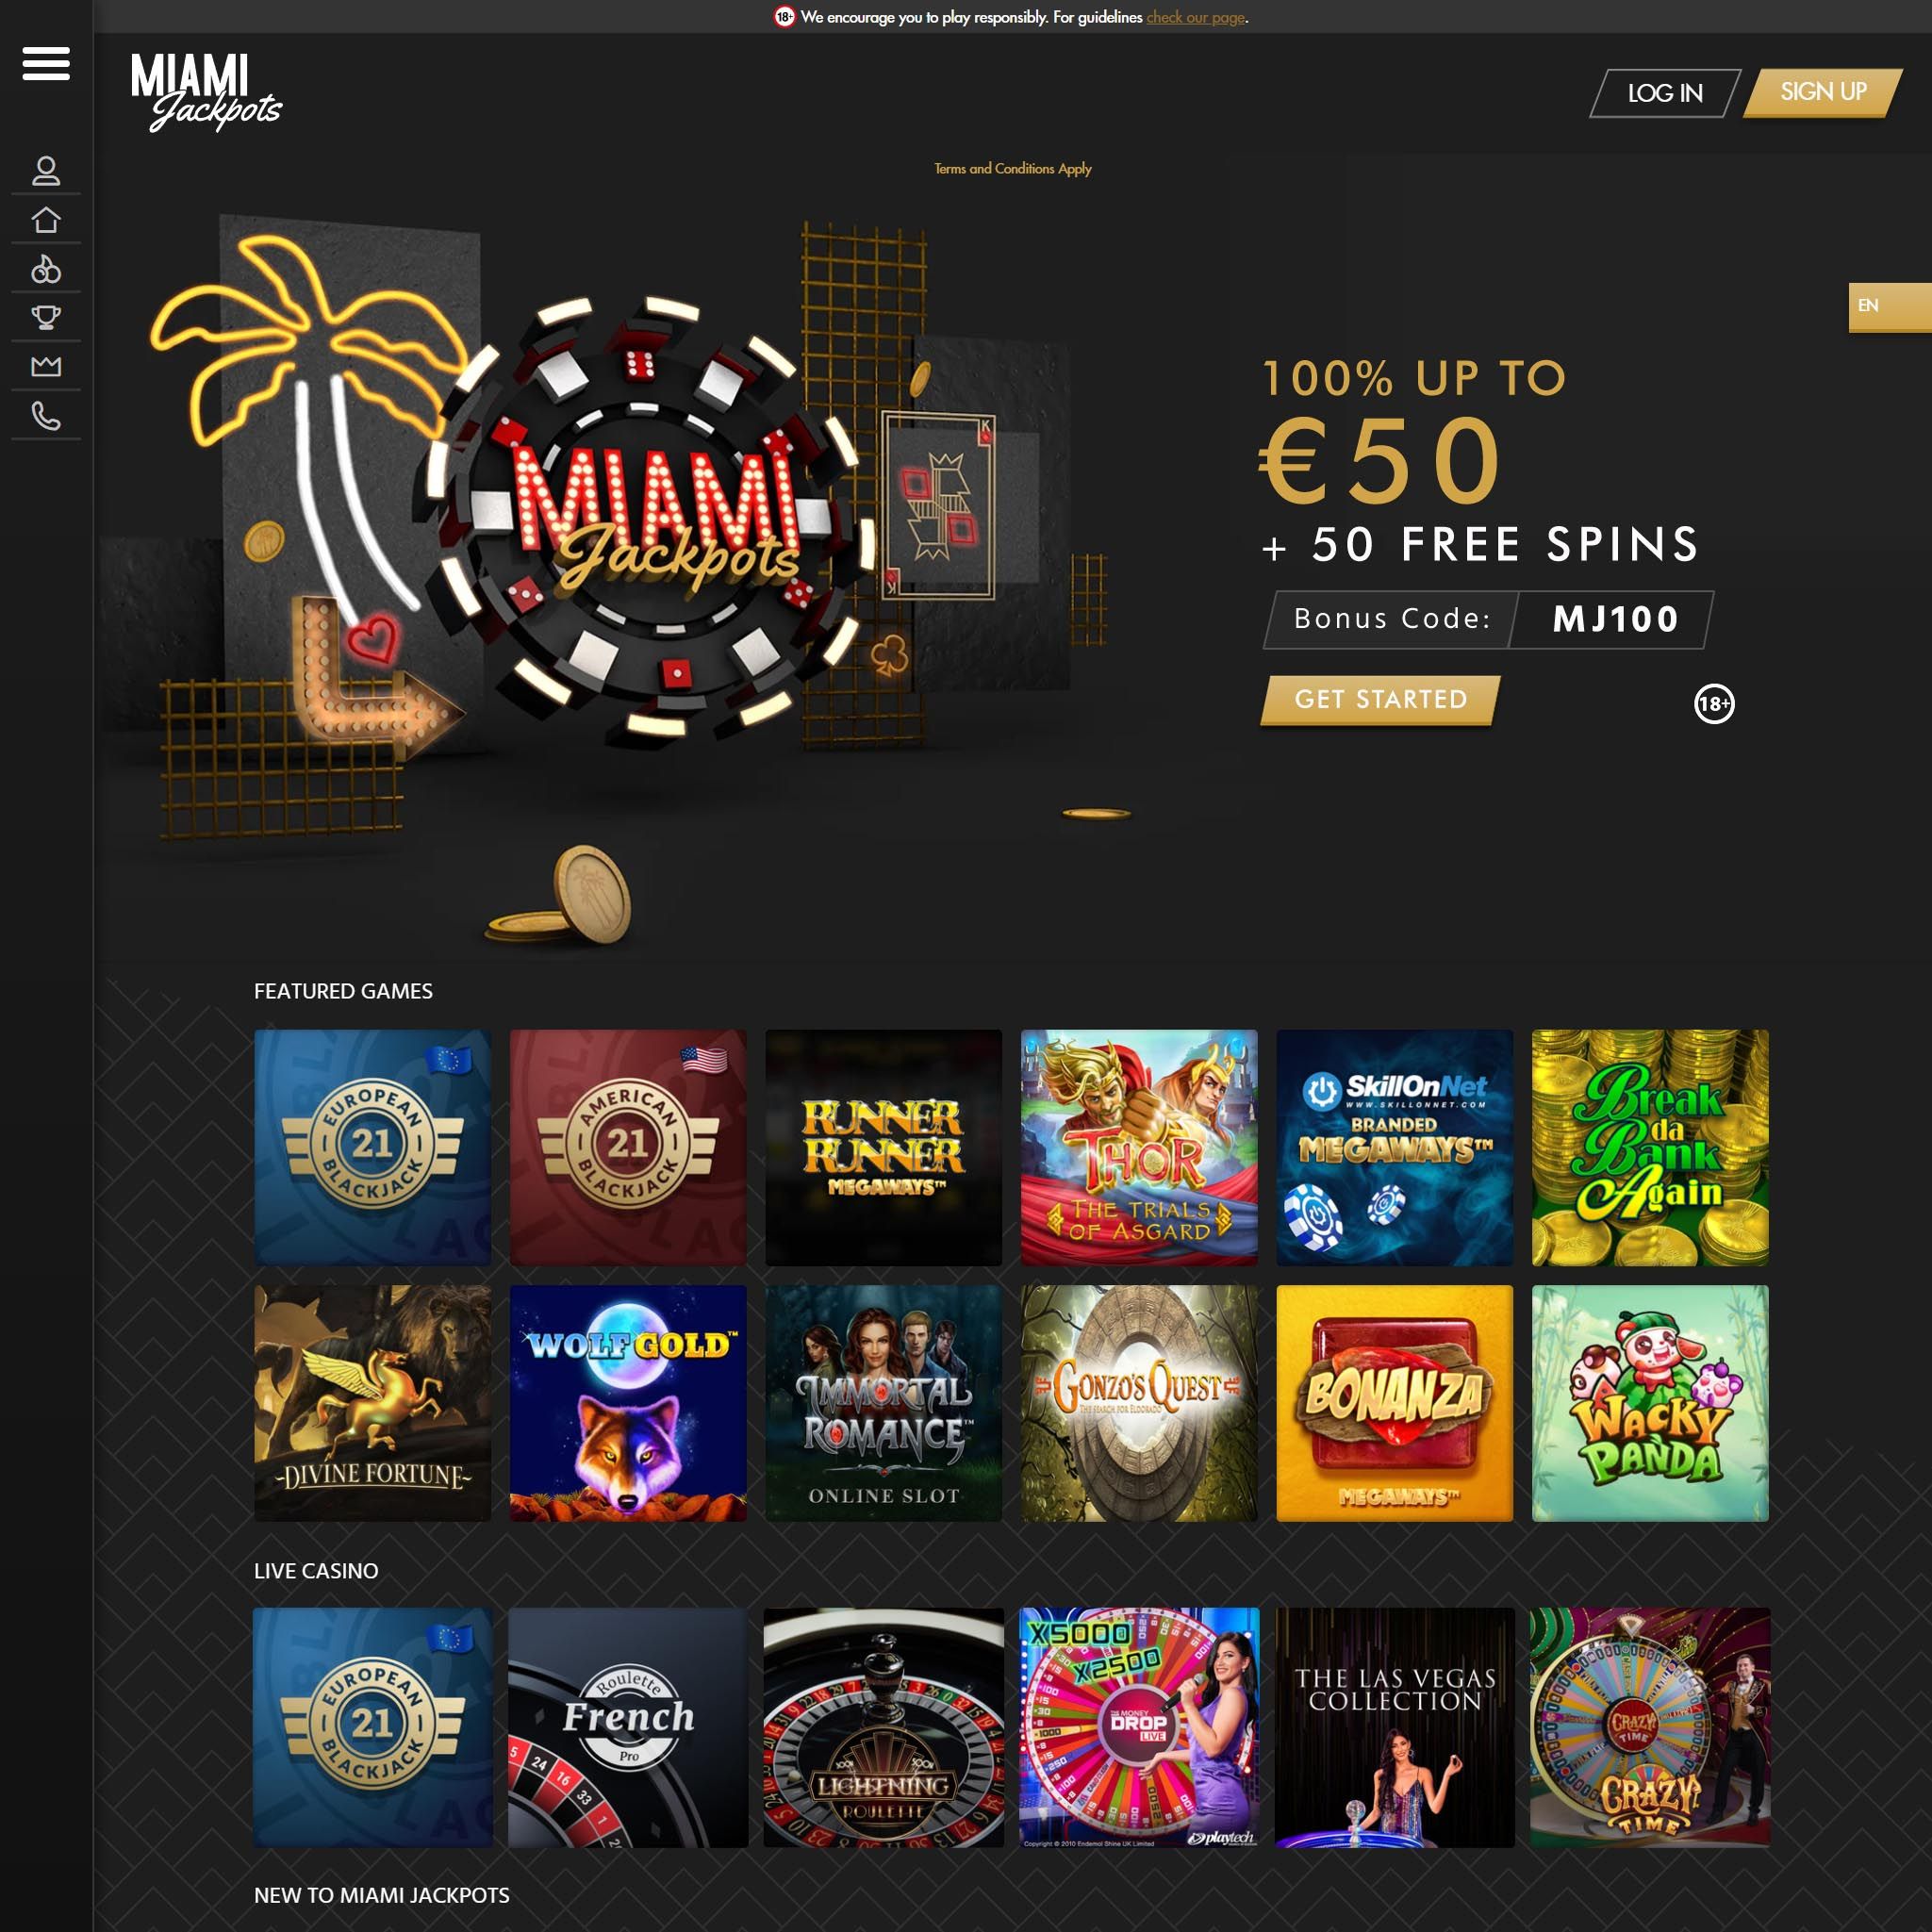 Miami Jackpots UK review by Mr. Gamble